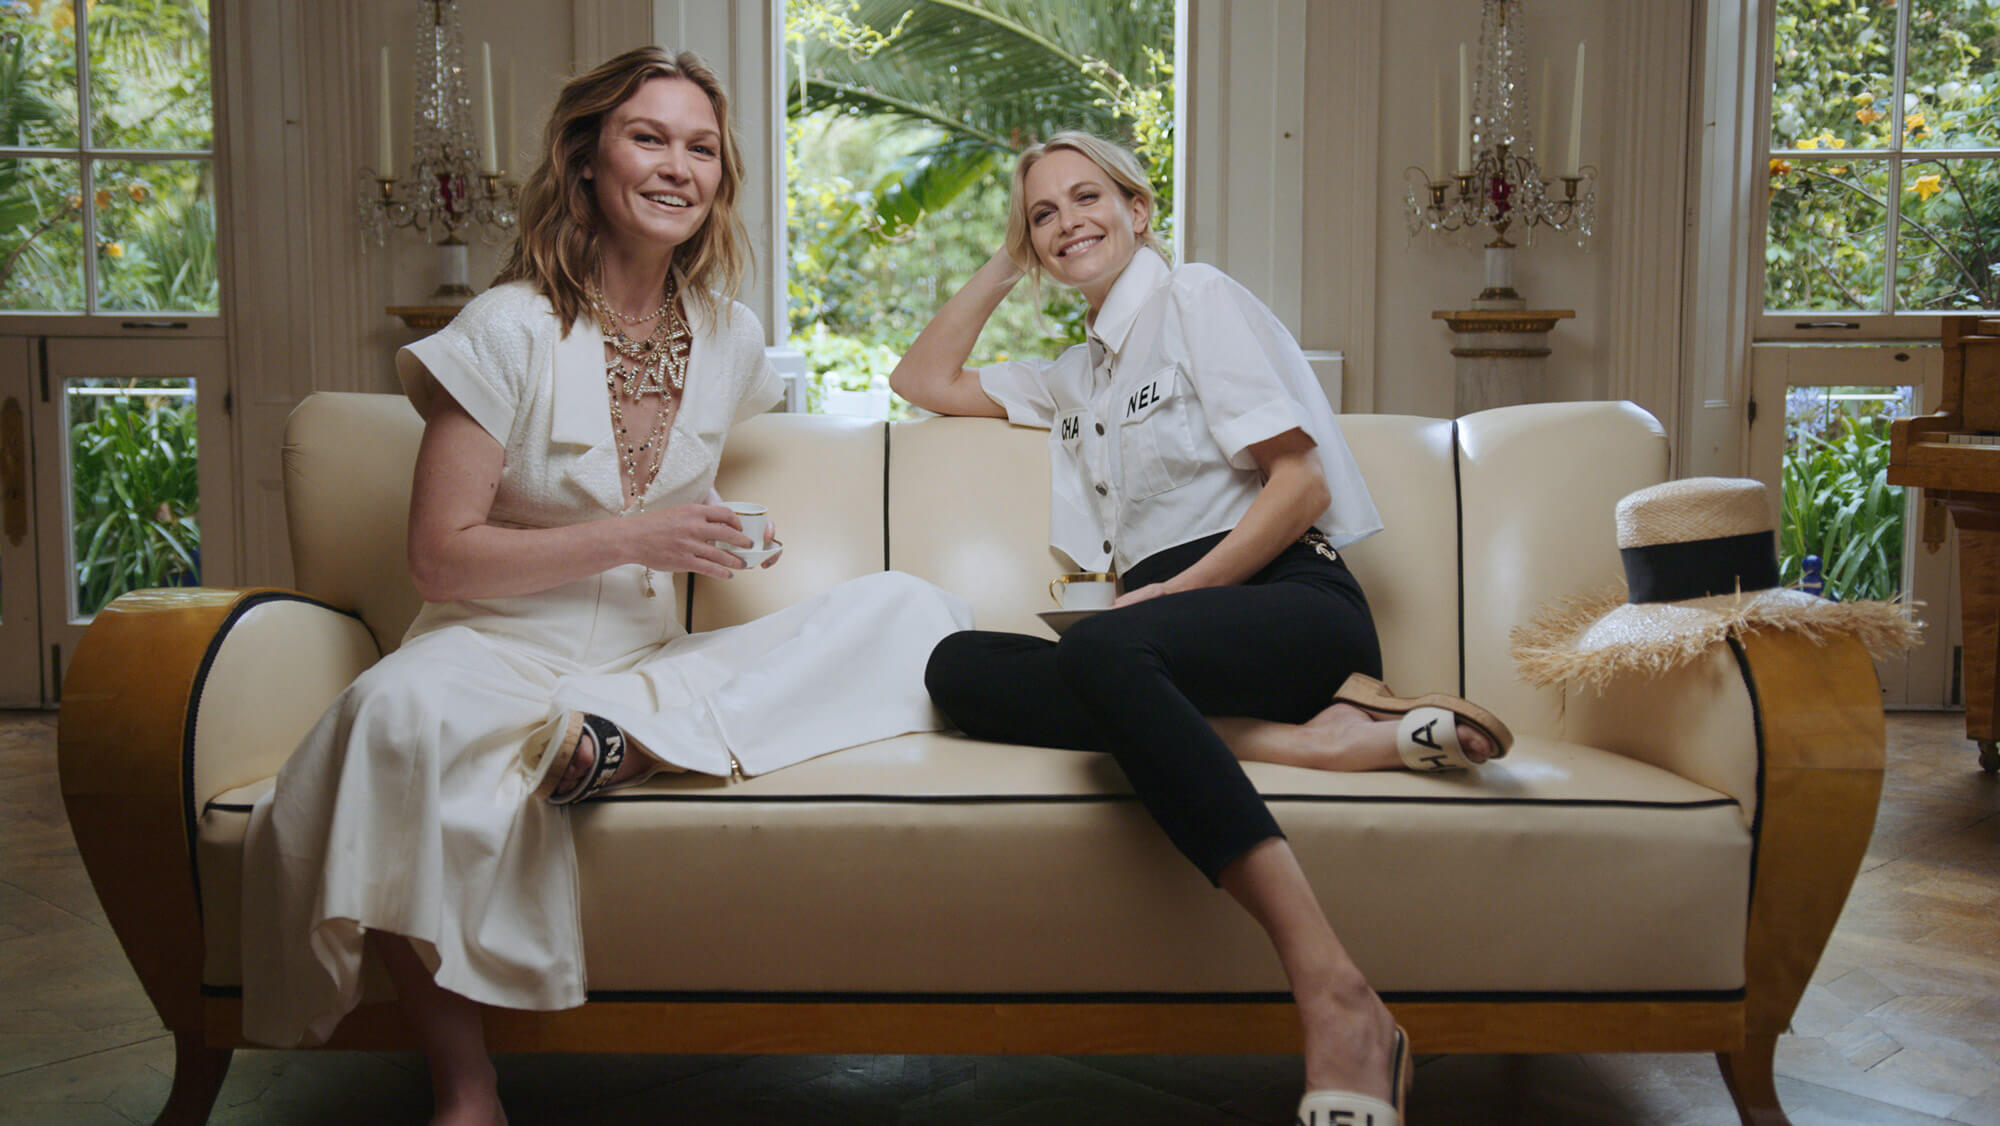 Julia Stiles and Poppy Delevingne in a Riviera fashion editorial interview for Harper’s Bazaar, from the Rise Media case studies archive